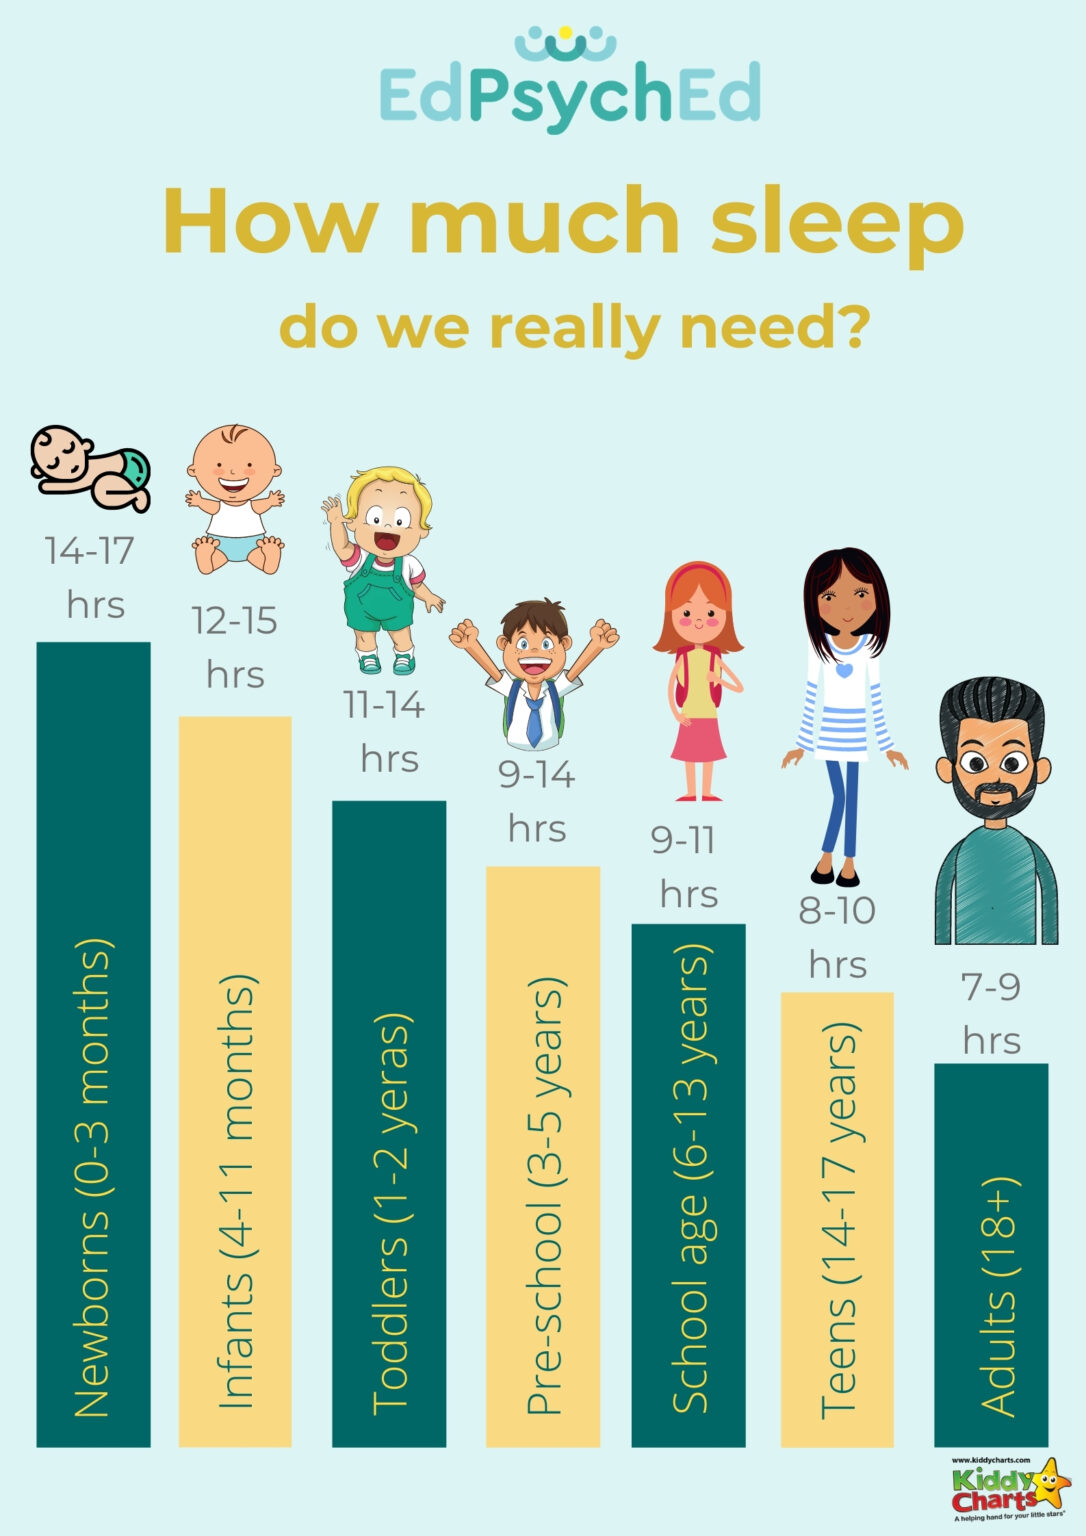 bedtime routines for kids and nap times by age how much sleep do kids need 1086x1536